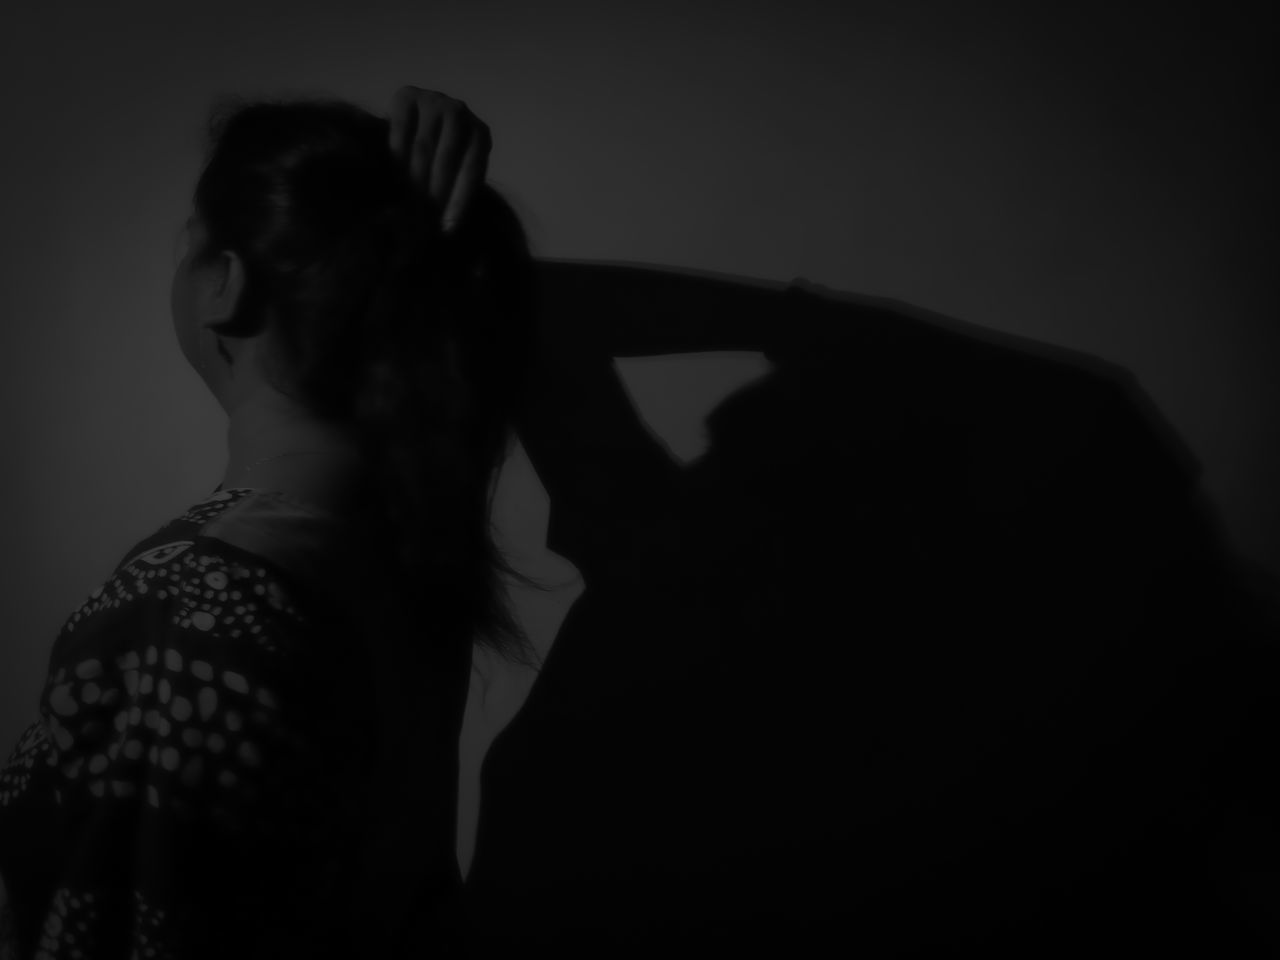 black, darkness, one person, adult, black and white, indoors, studio shot, women, silhouette, light, monochrome photography, dark, young adult, monochrome, white, portrait, emotion, sadness, waist up, shadow, depression - sadness, black background, lifestyles, side view, headshot, copy space, standing